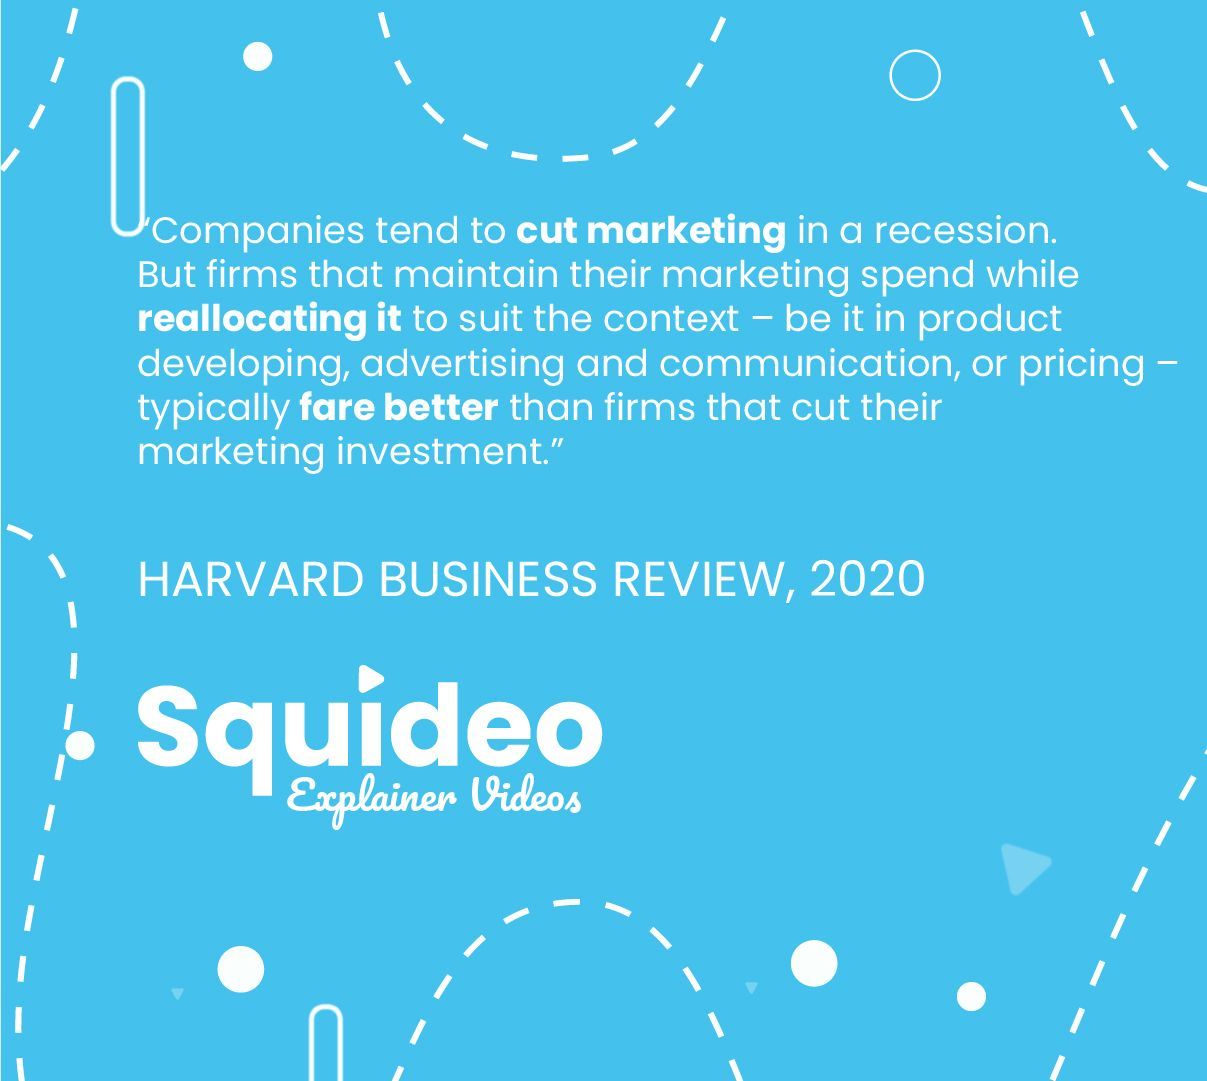 “Companies tend to cut marketing in a recession. But firms that maintain their marketing spend while reallocating it to suit the context – be it in product developing, advertising and communication, or pricing – typically fare better than firms that cut their marketing investment.” HARVARD BUSINESS REVIEW, 2020